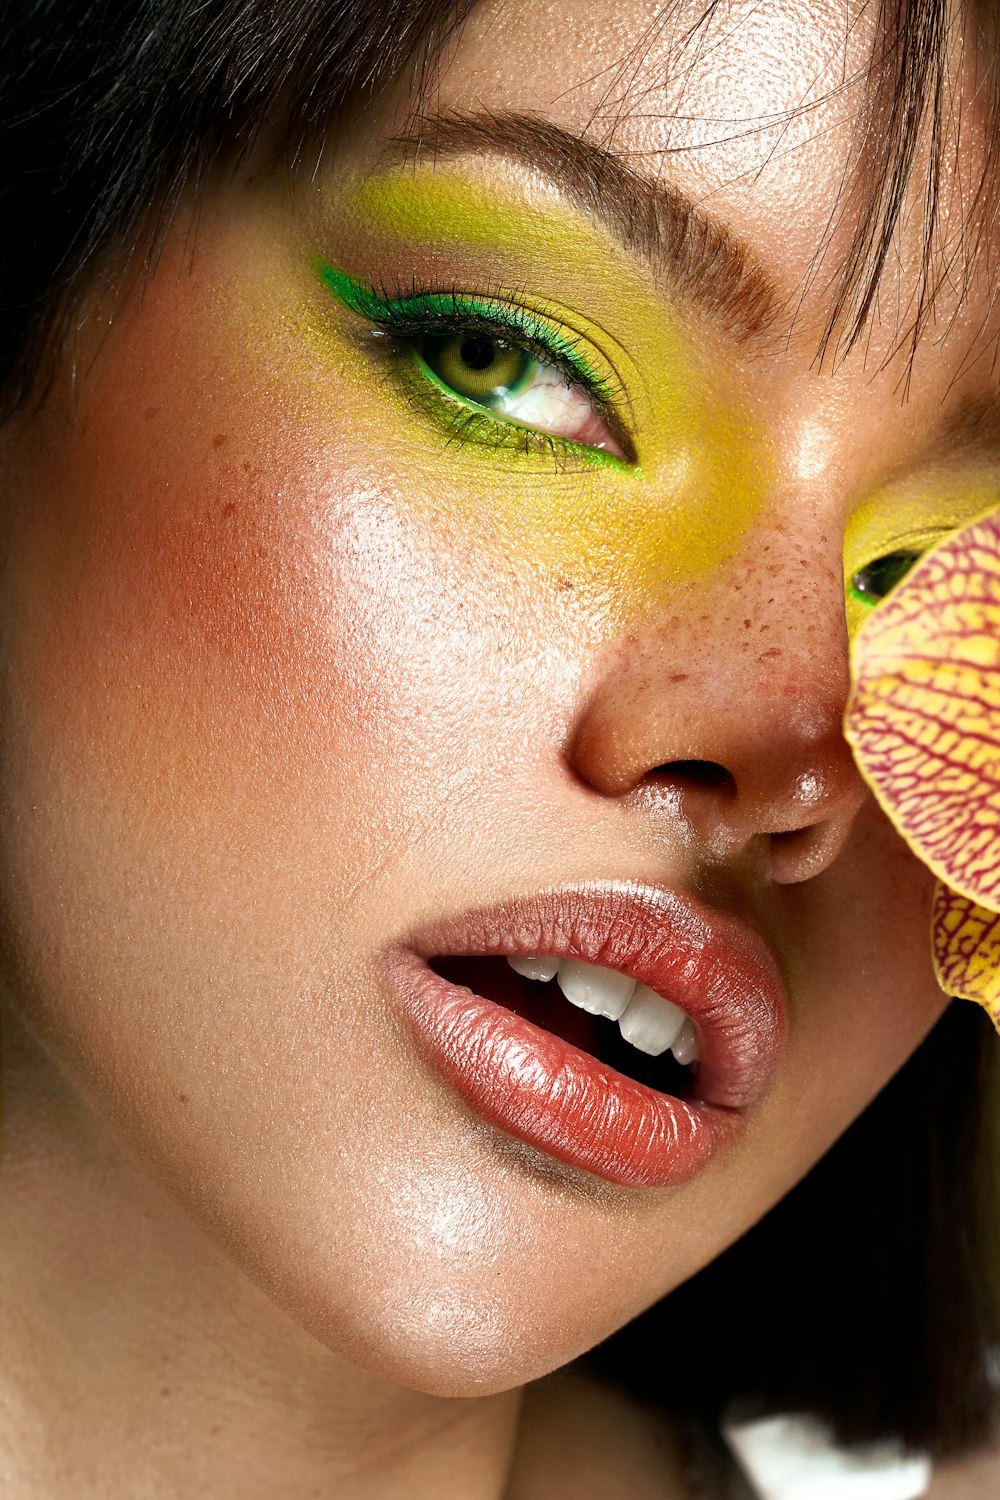 a woman with green and yellow makeup holding a flower